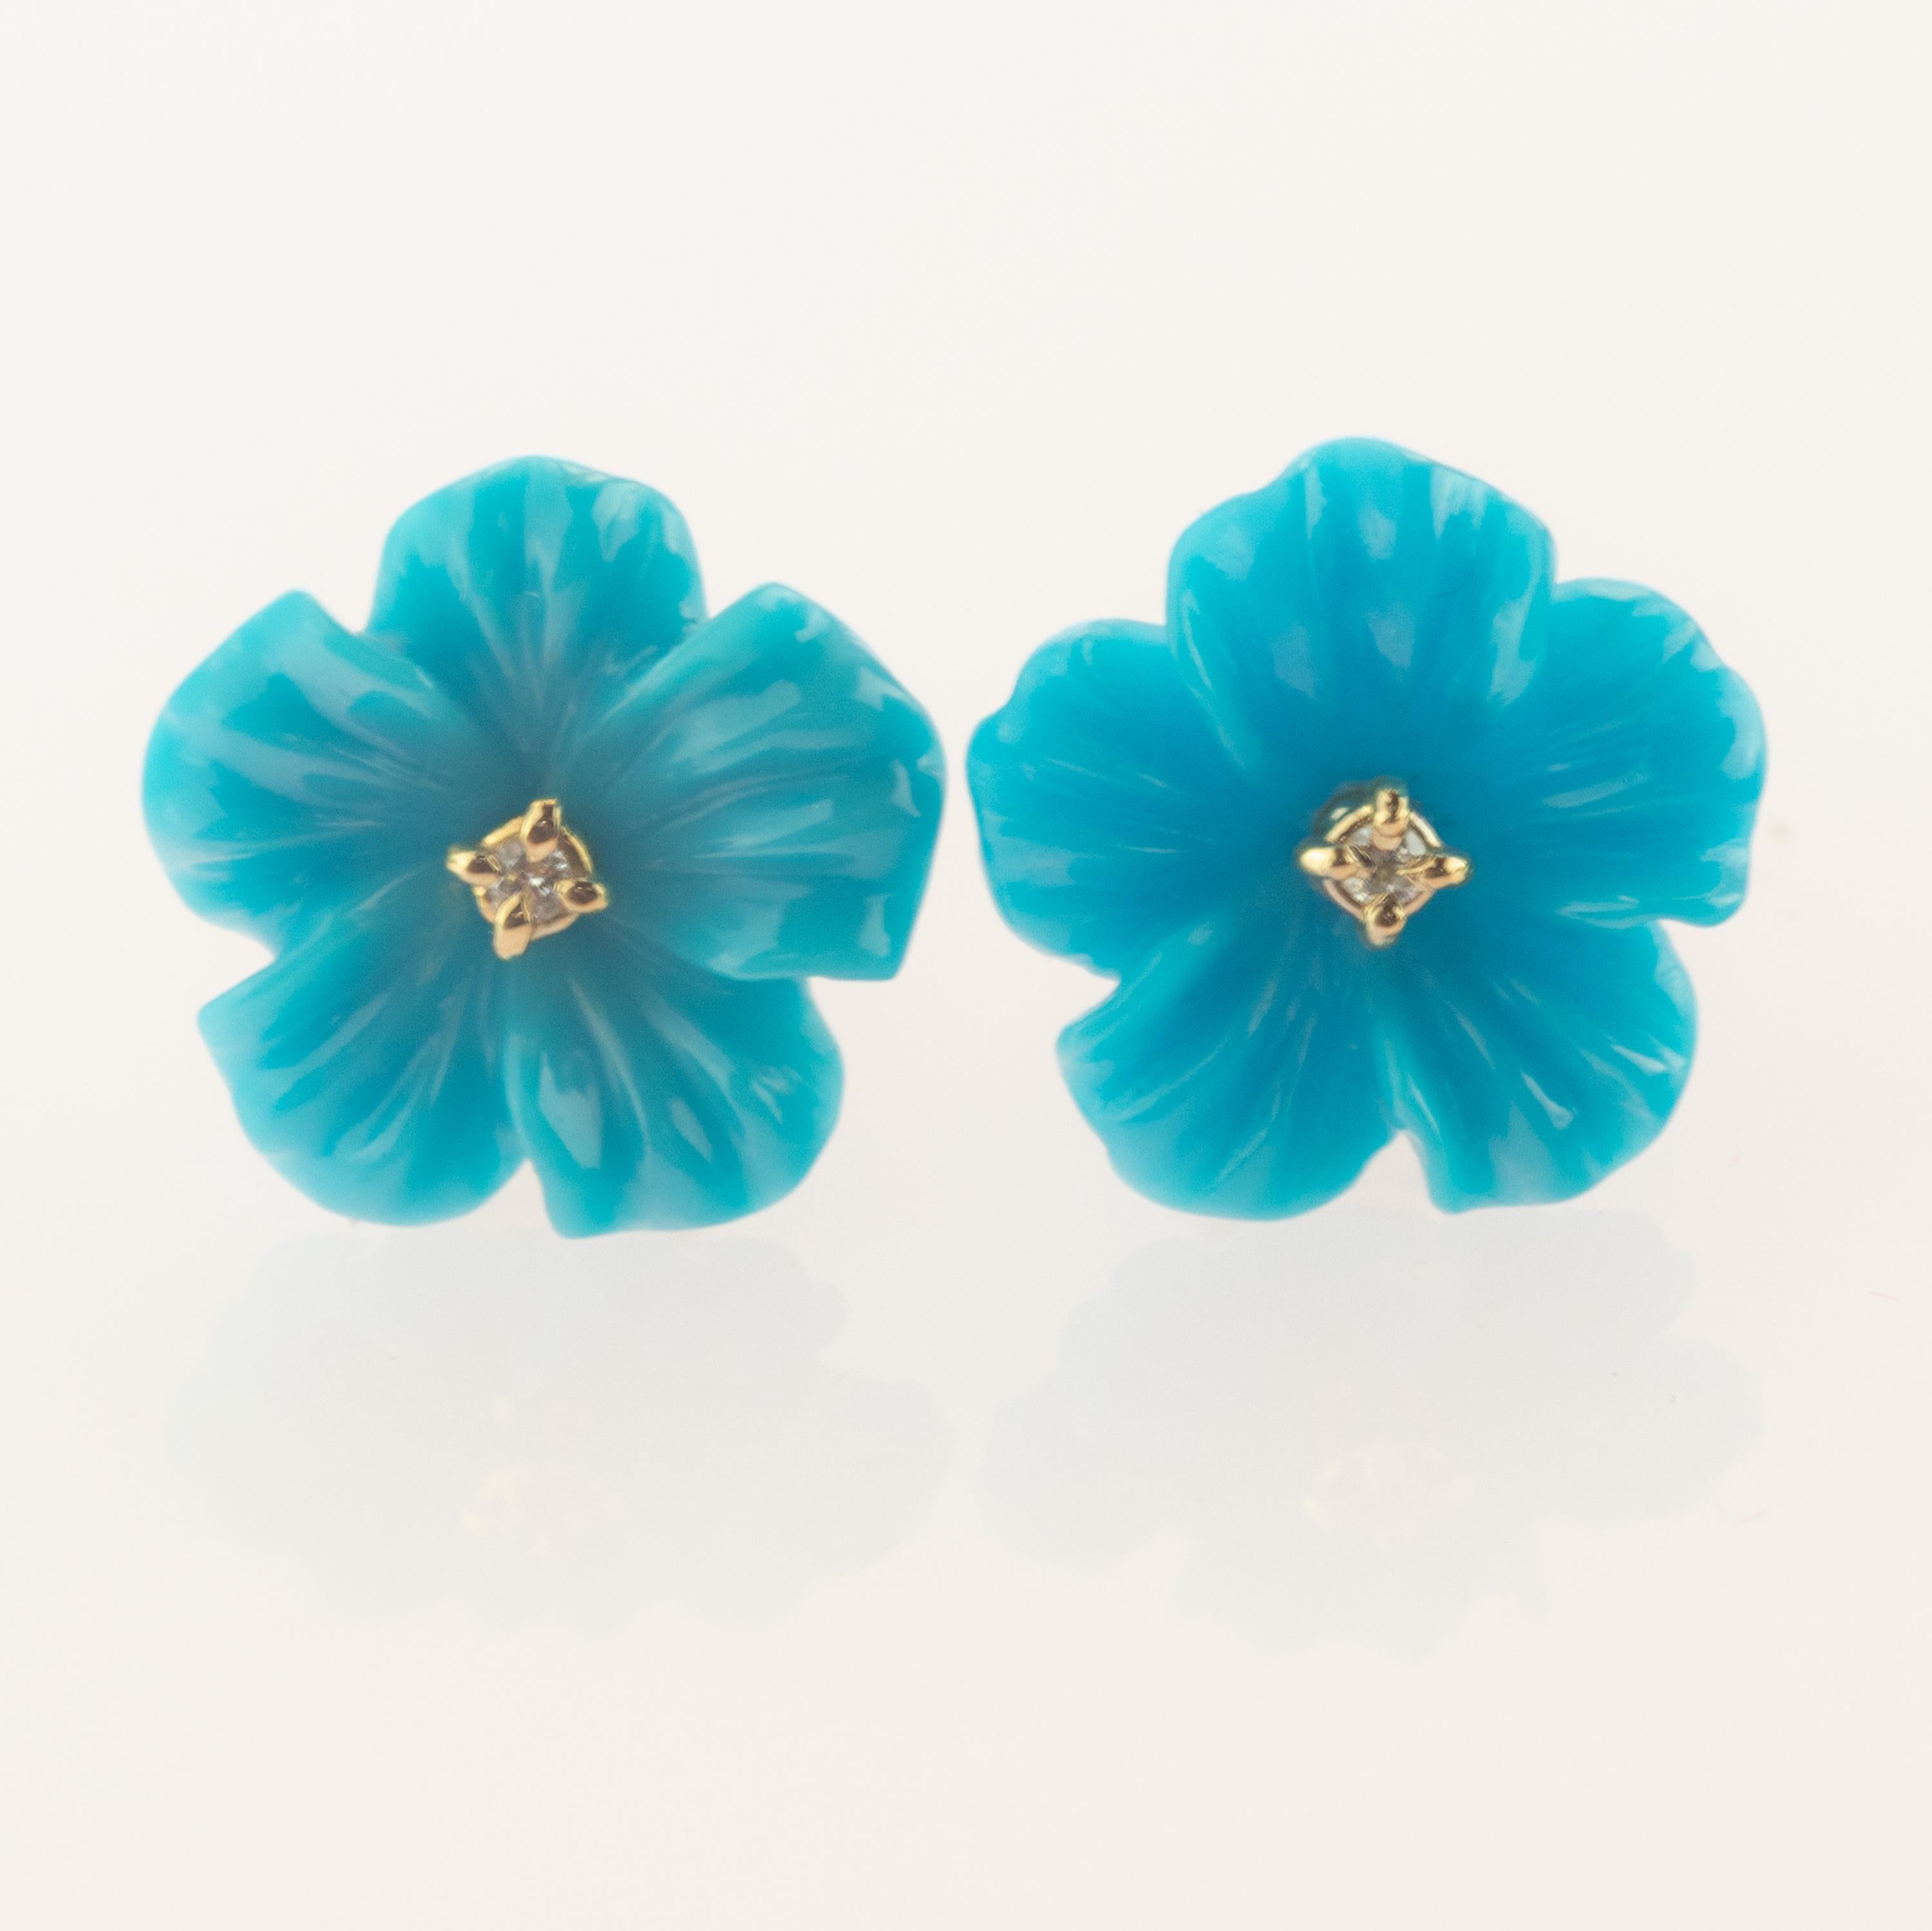 Astonishing natural turquoise flowers stud earrings, Carved petals that evoke the italian handmade traditional jewelry work. Handmade blue earrings

Beautiful and delicate design that evokes the roots of beauty that are gradually woven to achieve a